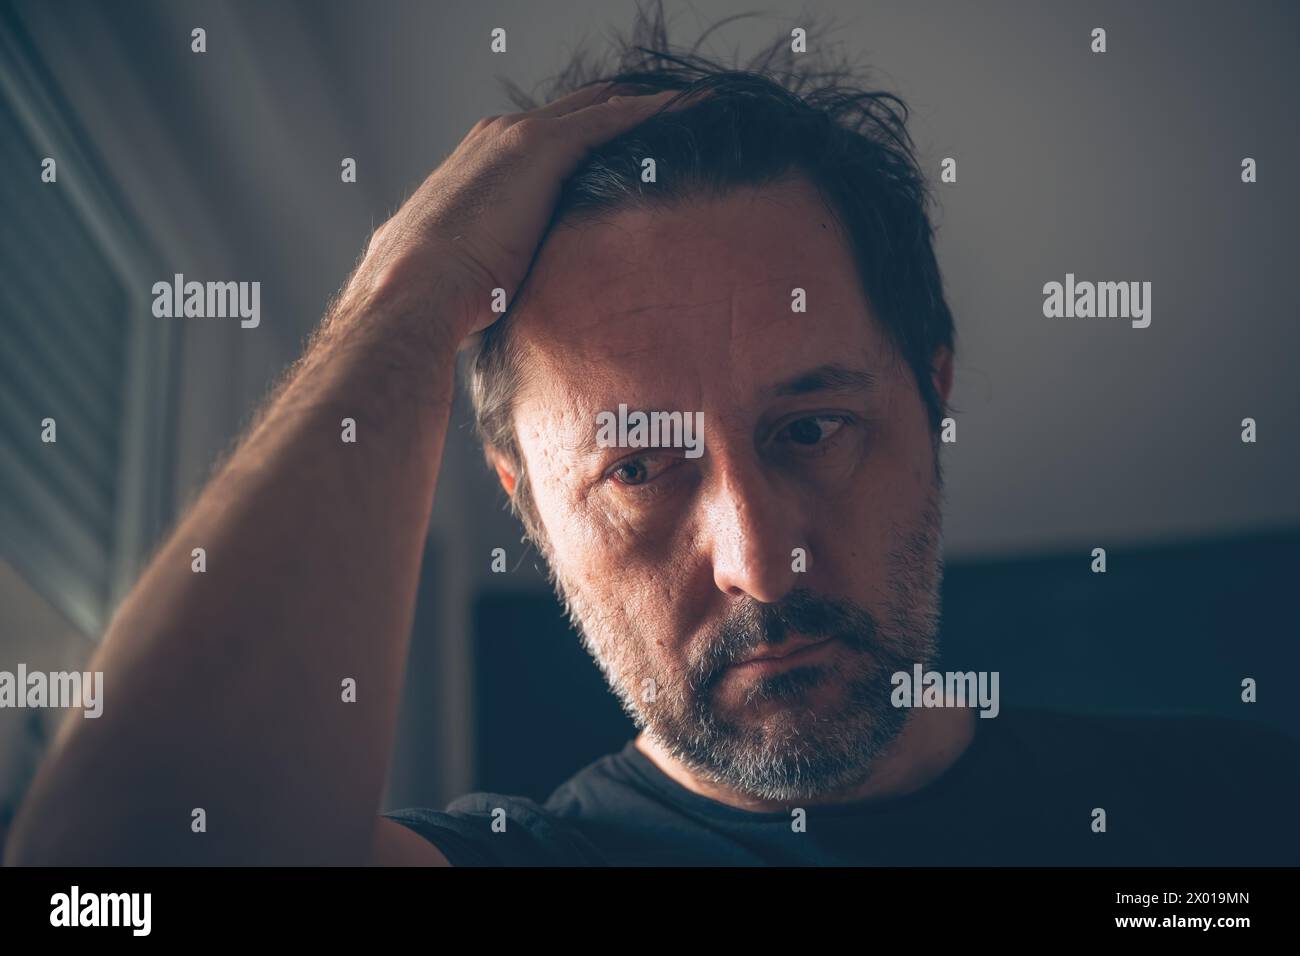 Disappointed adult caucasian male looking down in dark room, selective focus Stock Photo